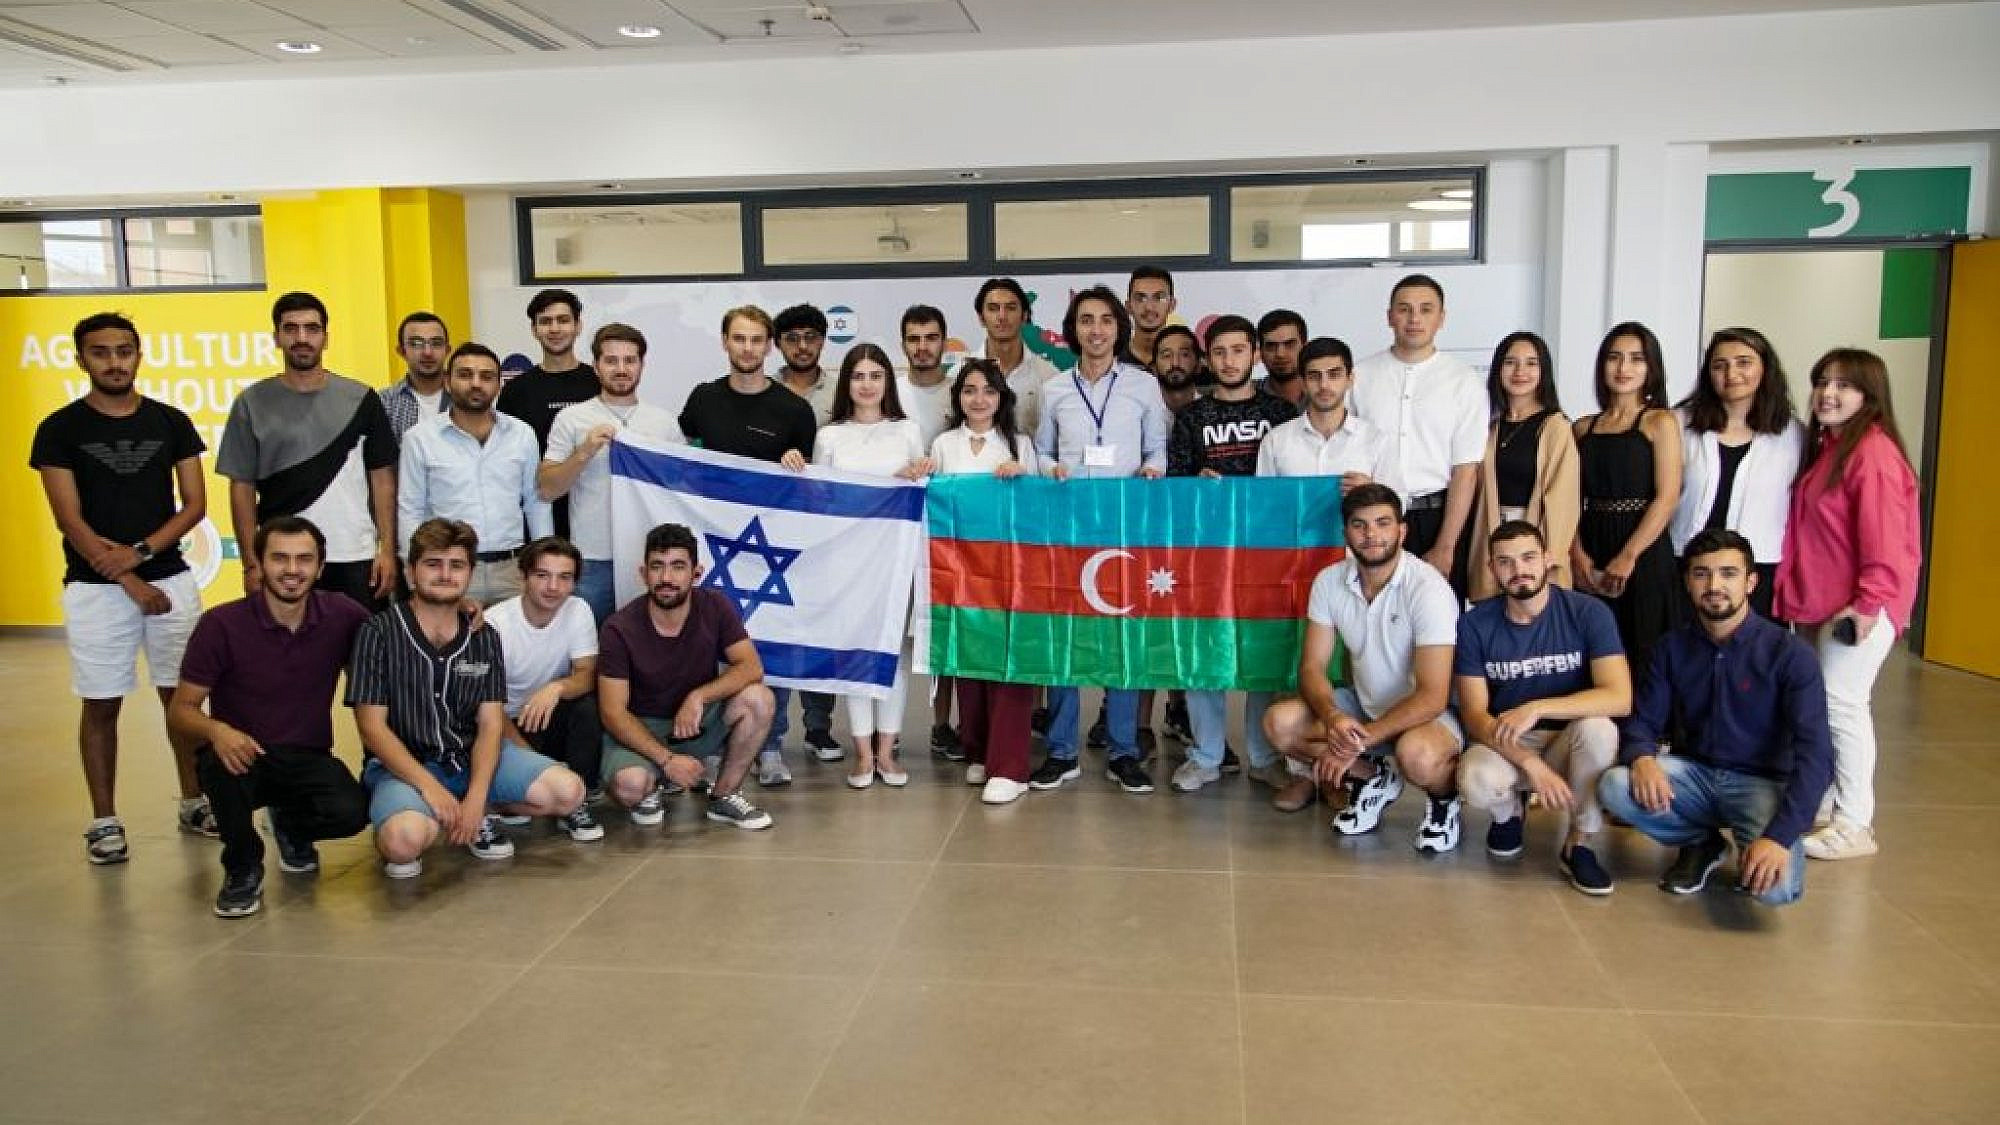 Azerbaijani agricultural students in Israel's Arava region towards the end of their program, June 7, 2023. Photo by Kobi Natan/TPS.